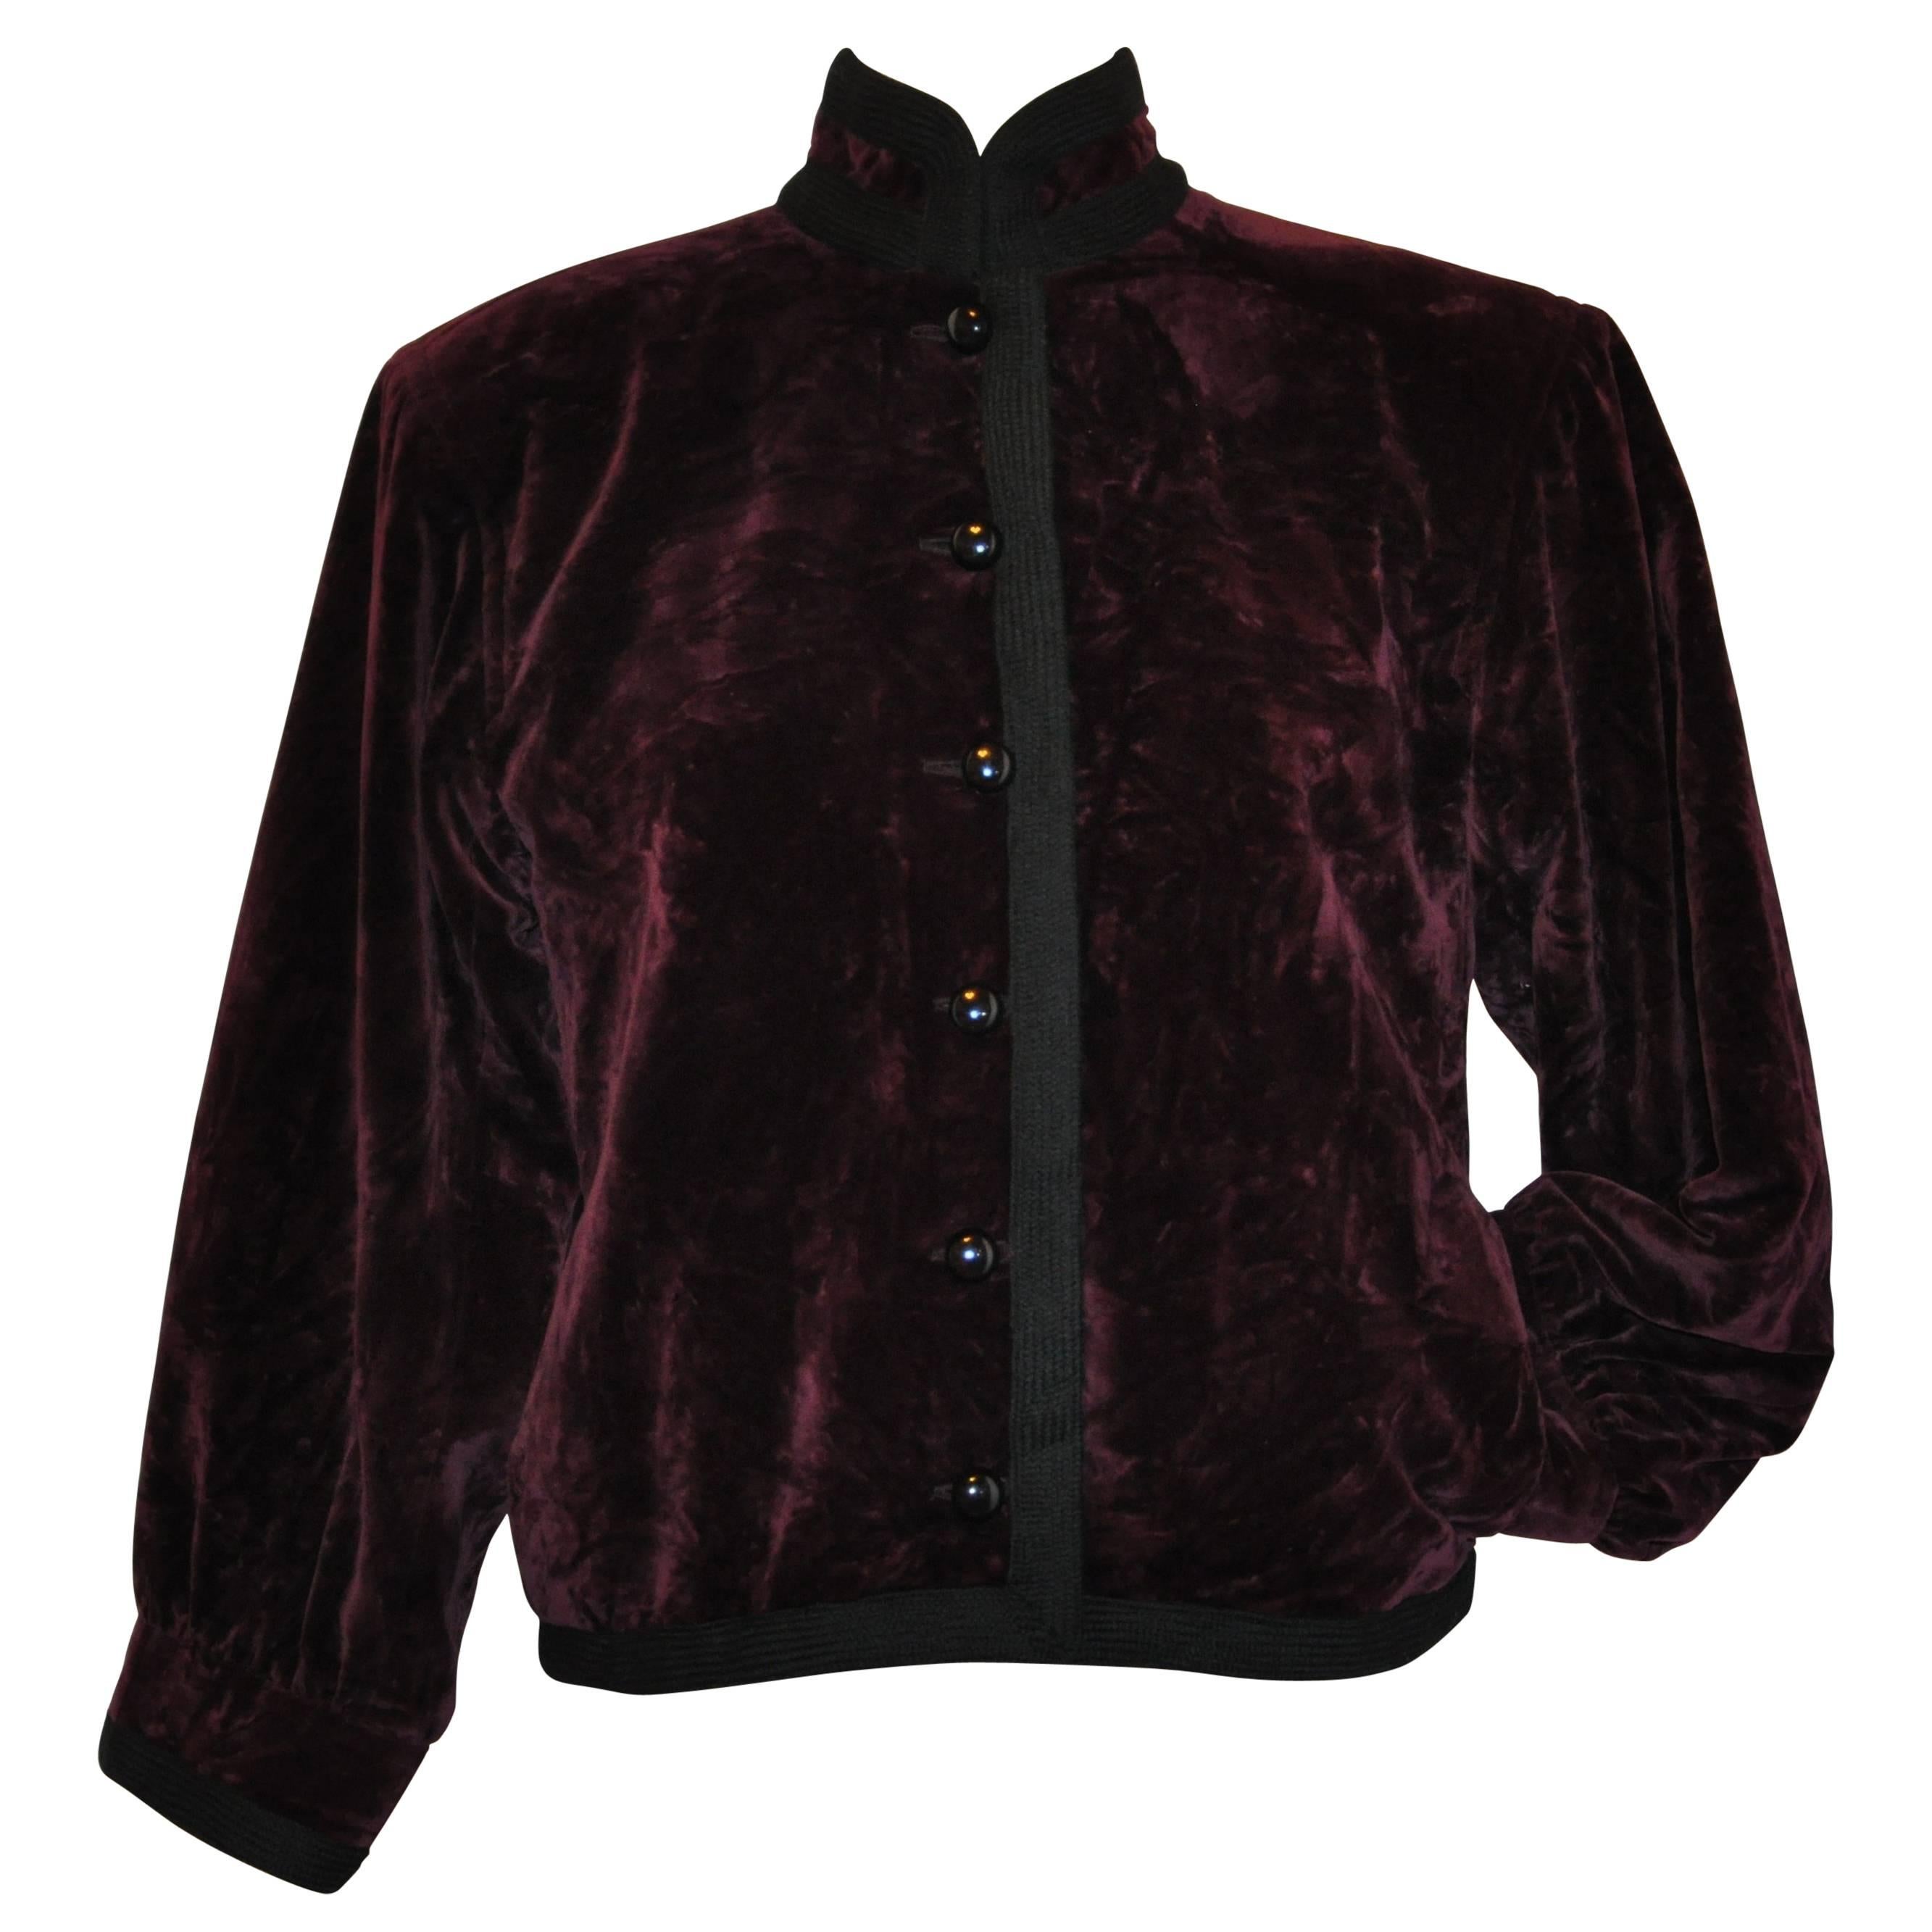 Yves Saint Laurent Iconic "Russian" Collection Maroon Crushed Velvet Jacket For Sale